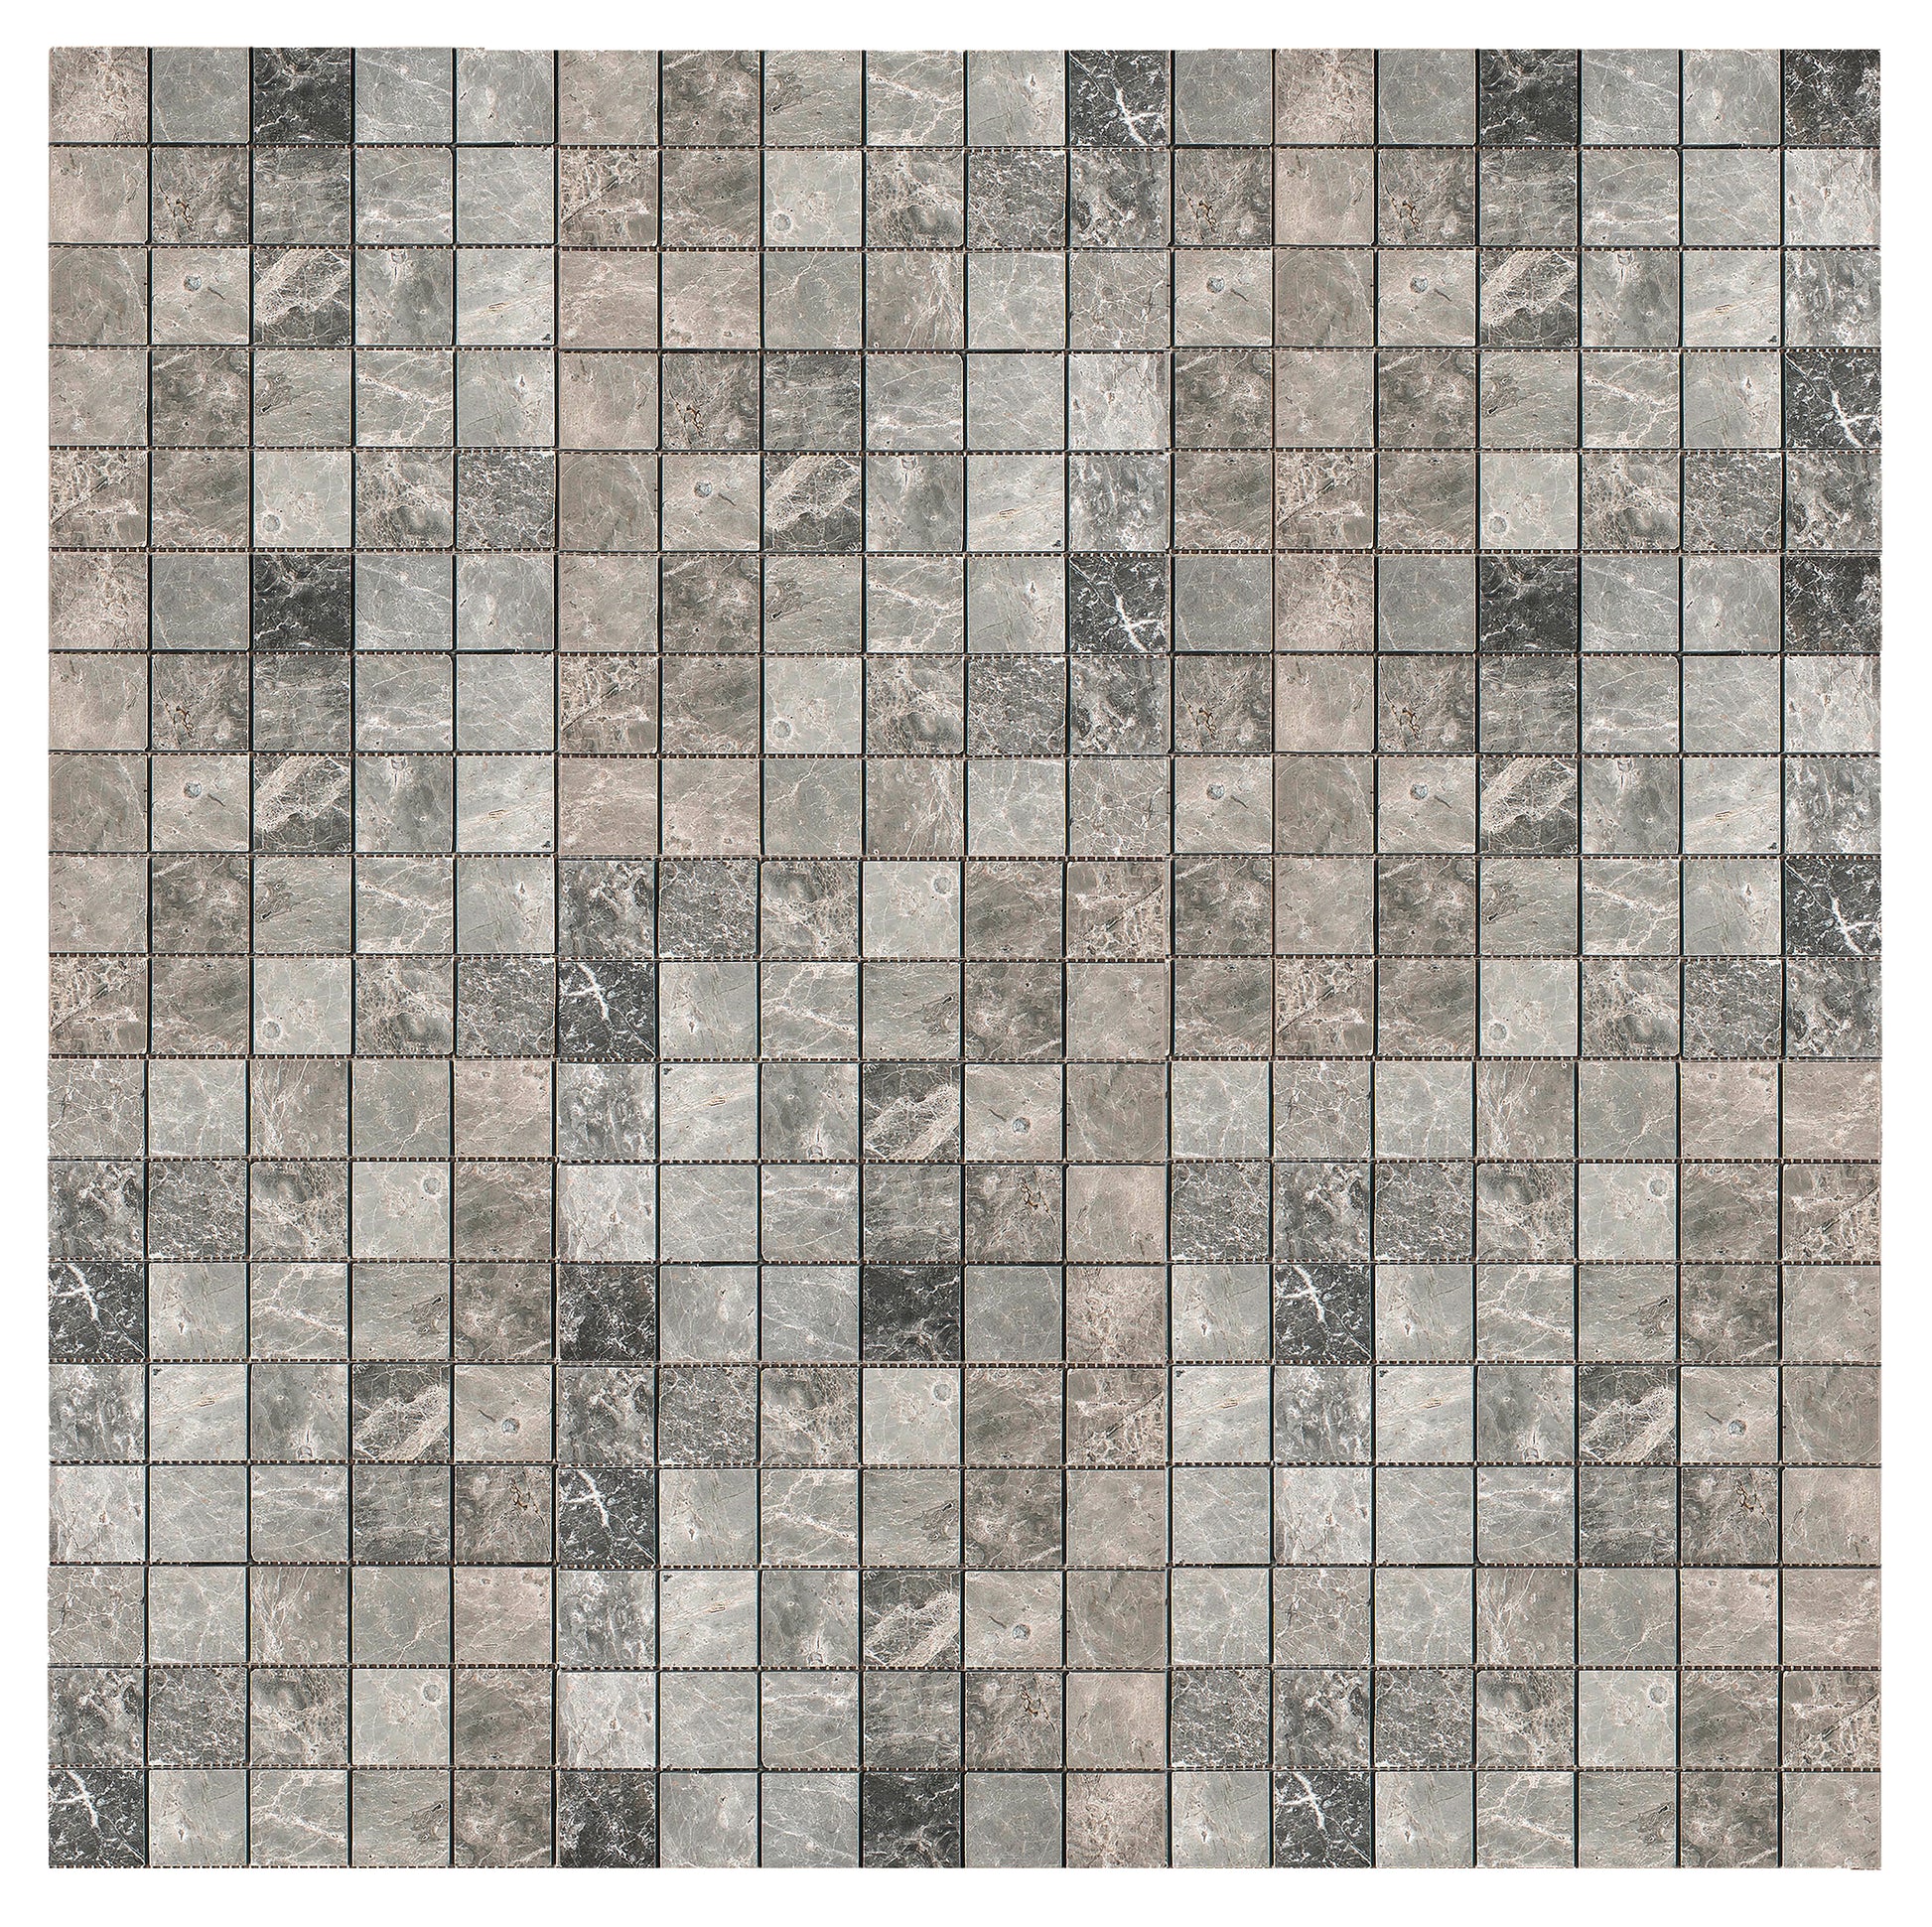 Tundra Gray Marble Square Mosaic Tile 5/8x5/8"